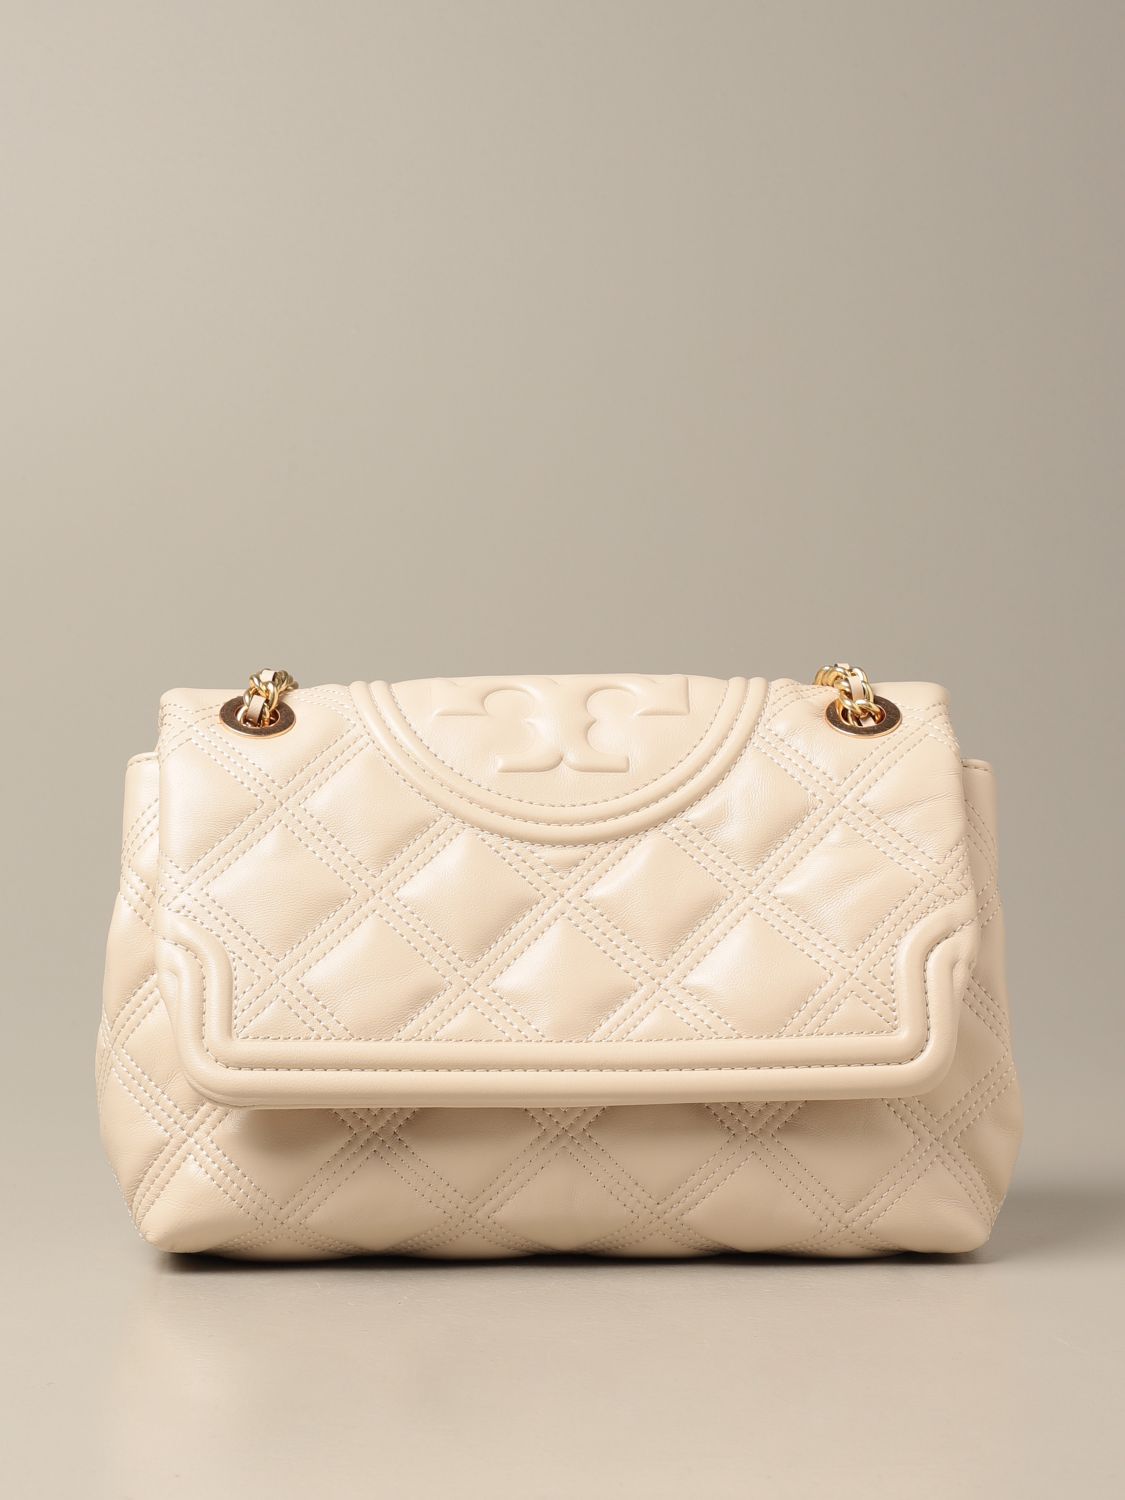 Tory Burch Fleming Convertible Shoulder Bag / Leather/New Cream